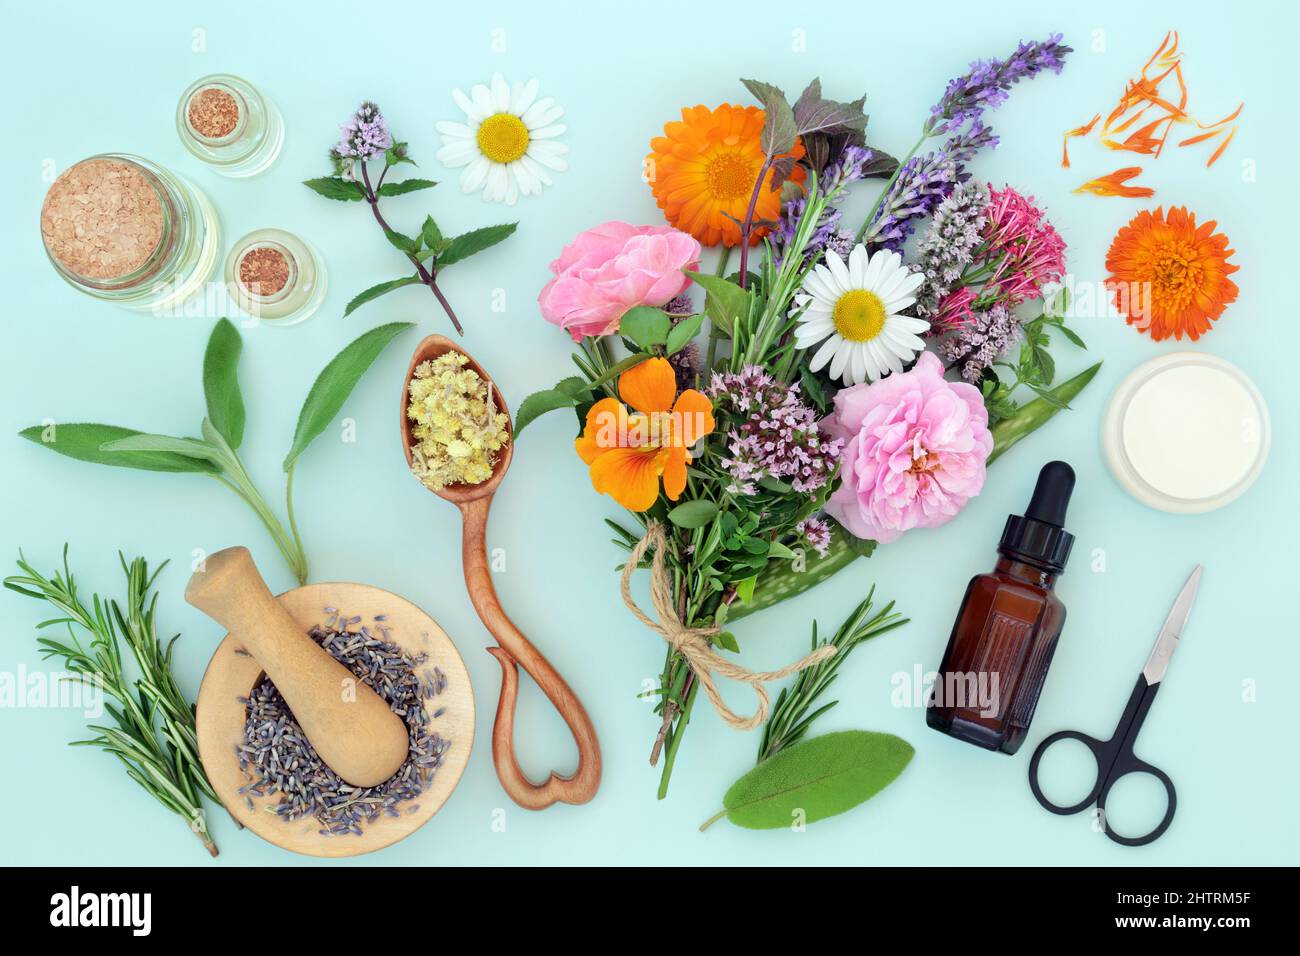 Preparation of flowers and herbs for natural herbal plant medicine remedies with essential oil bottles and moisturising cream. Alternative healthcare Stock Photo